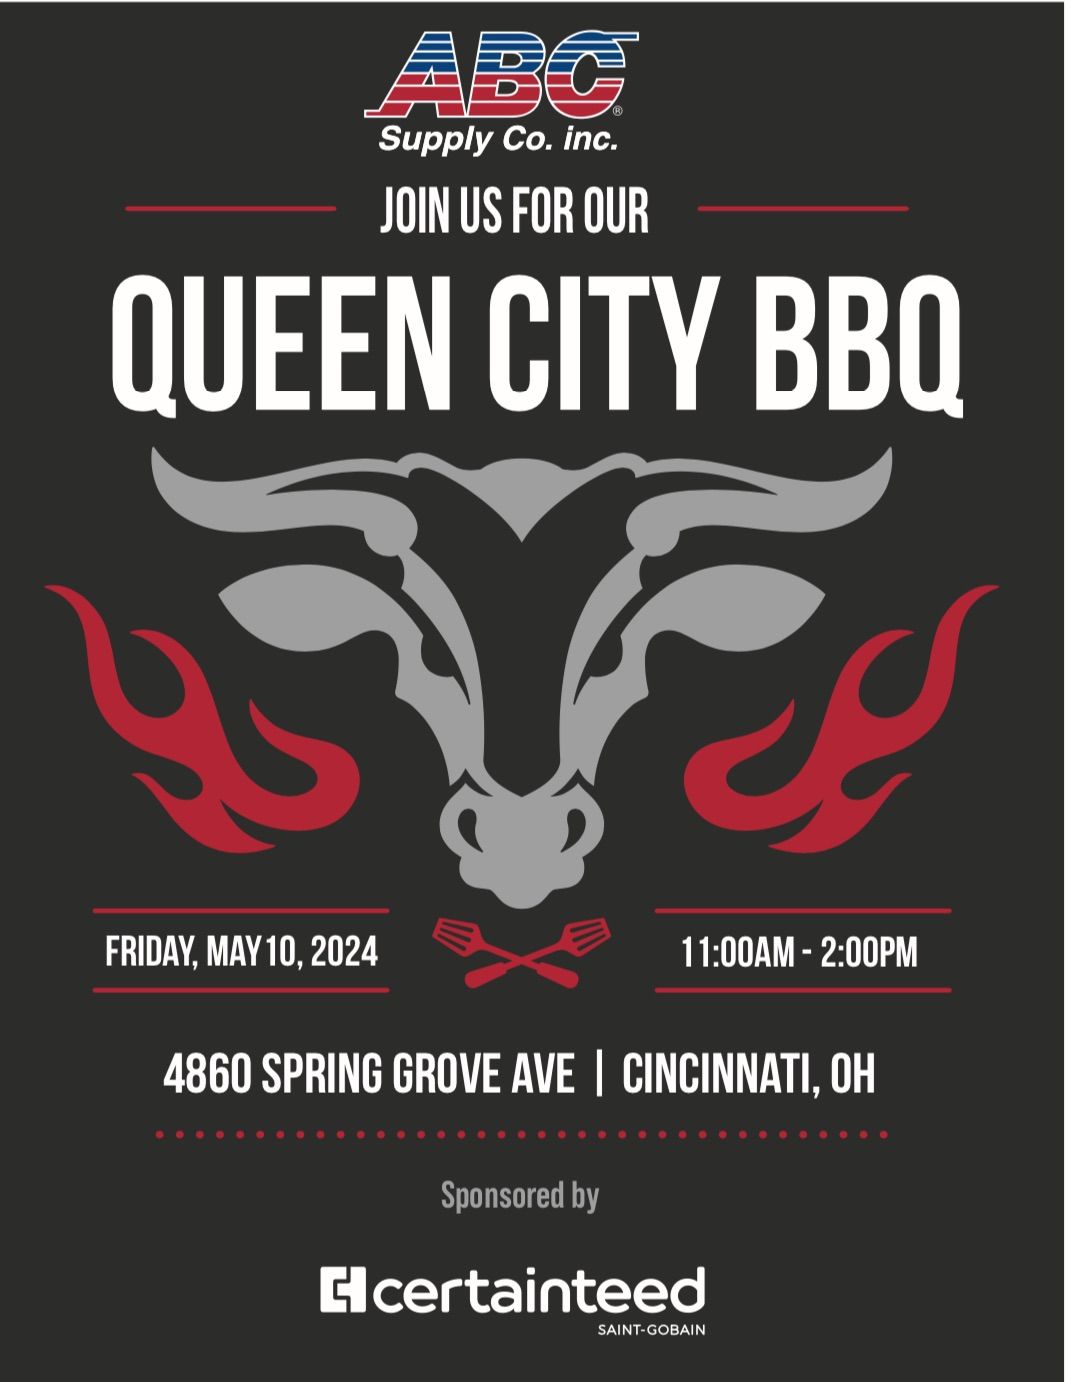 Queen City Bbq opening day